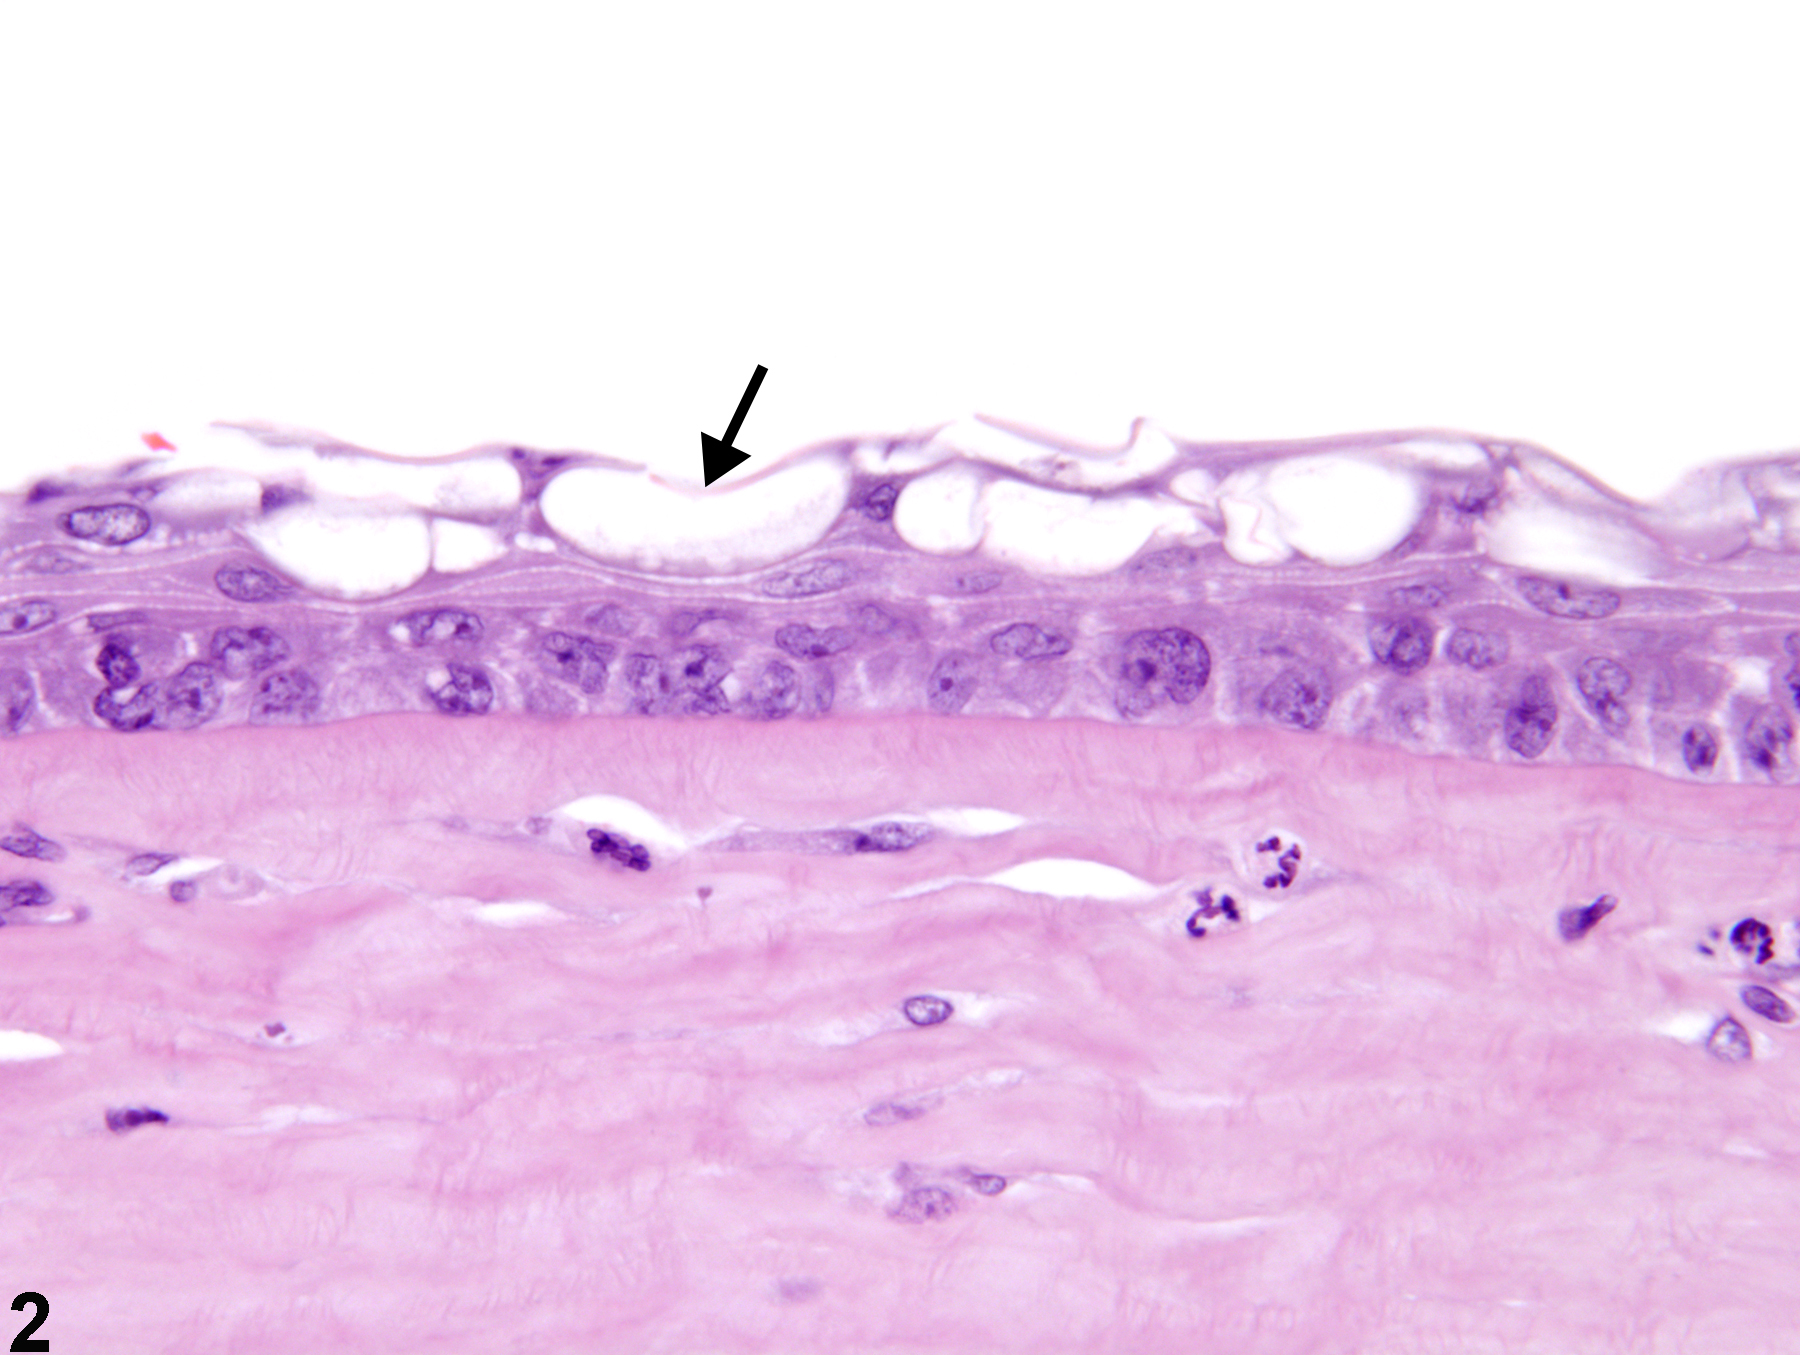 Image of cornea vacuolation, cytoplasmic in the eye from a male F344/N rat in a chronic study